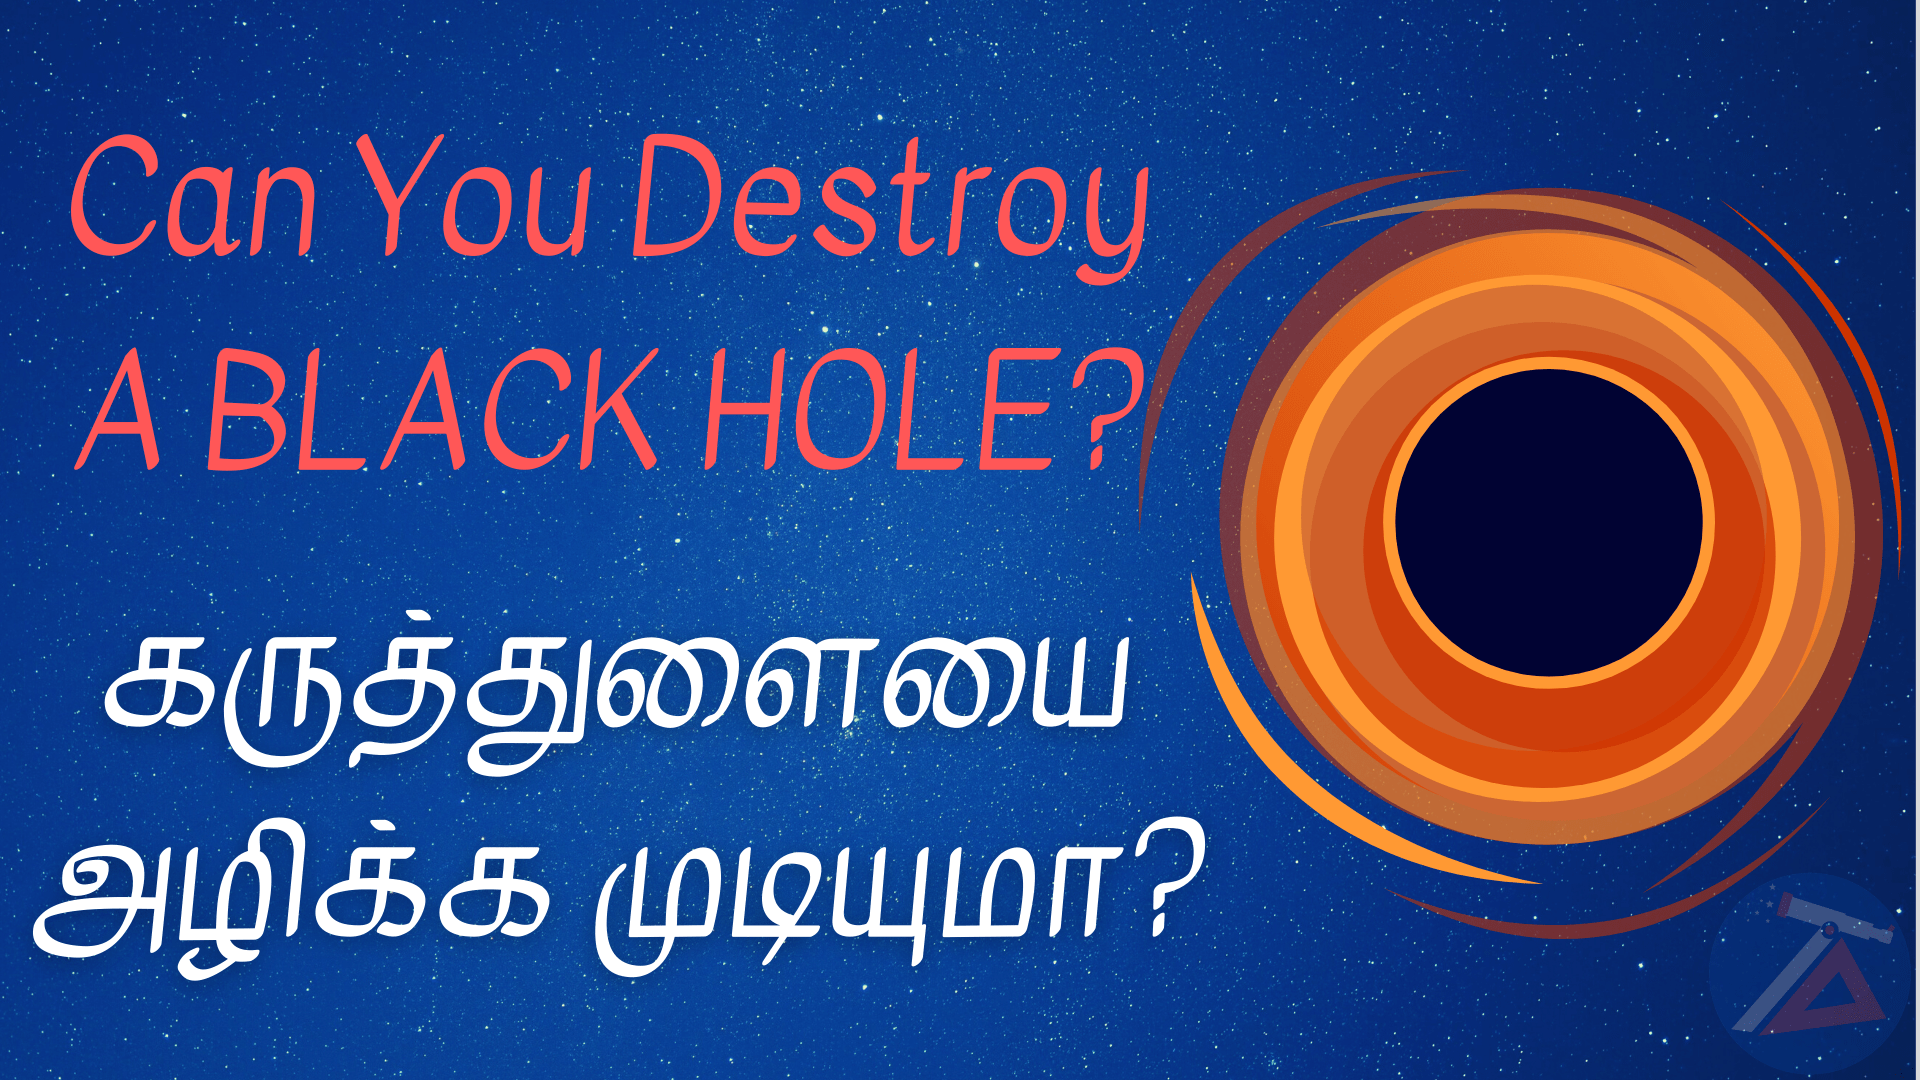 Can You Destroy A BLACK HOLE?